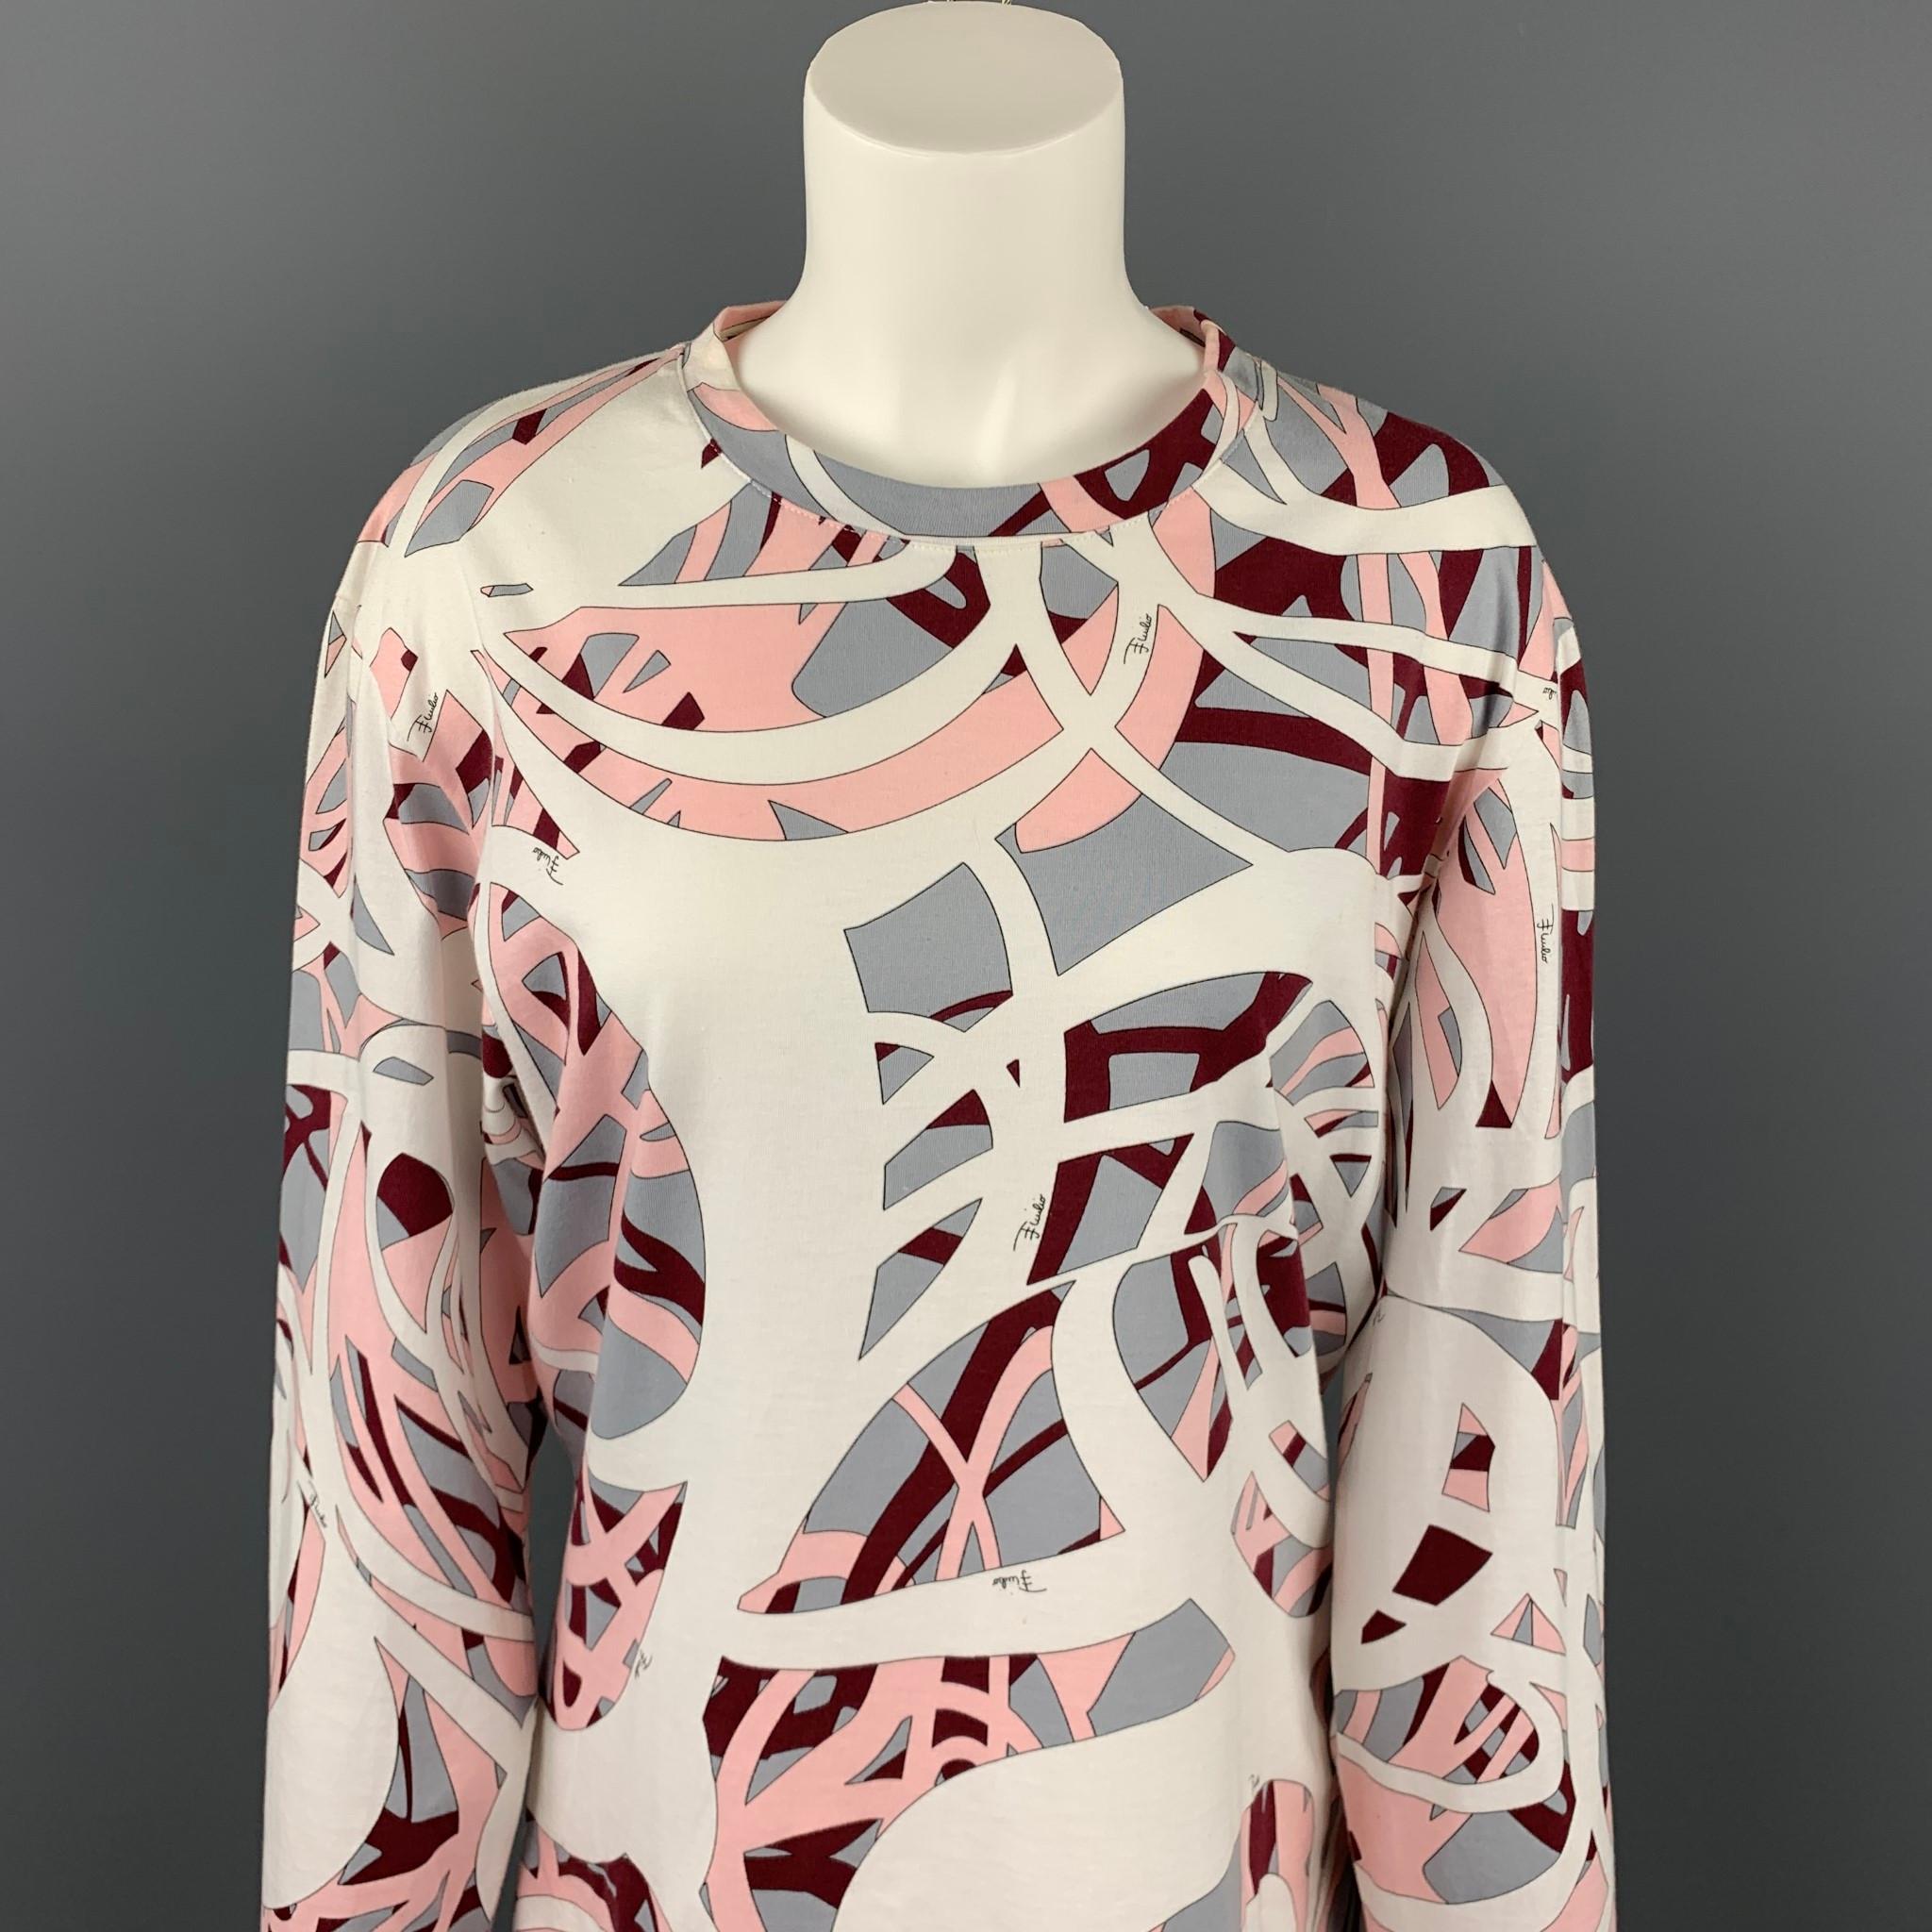 EMILIO PUCCI long sleeve t-shirt comes in a multi-color print cotton featuring a crew-neck. Moderate discoloration. Made in Italy.

Good Pre-Owned Condition.
Marked: L

Measurements:

Shoulder: 19 in. 
Bust: 42 in. 
Sleeve: 26.5 in. 
Length: 26 in. 